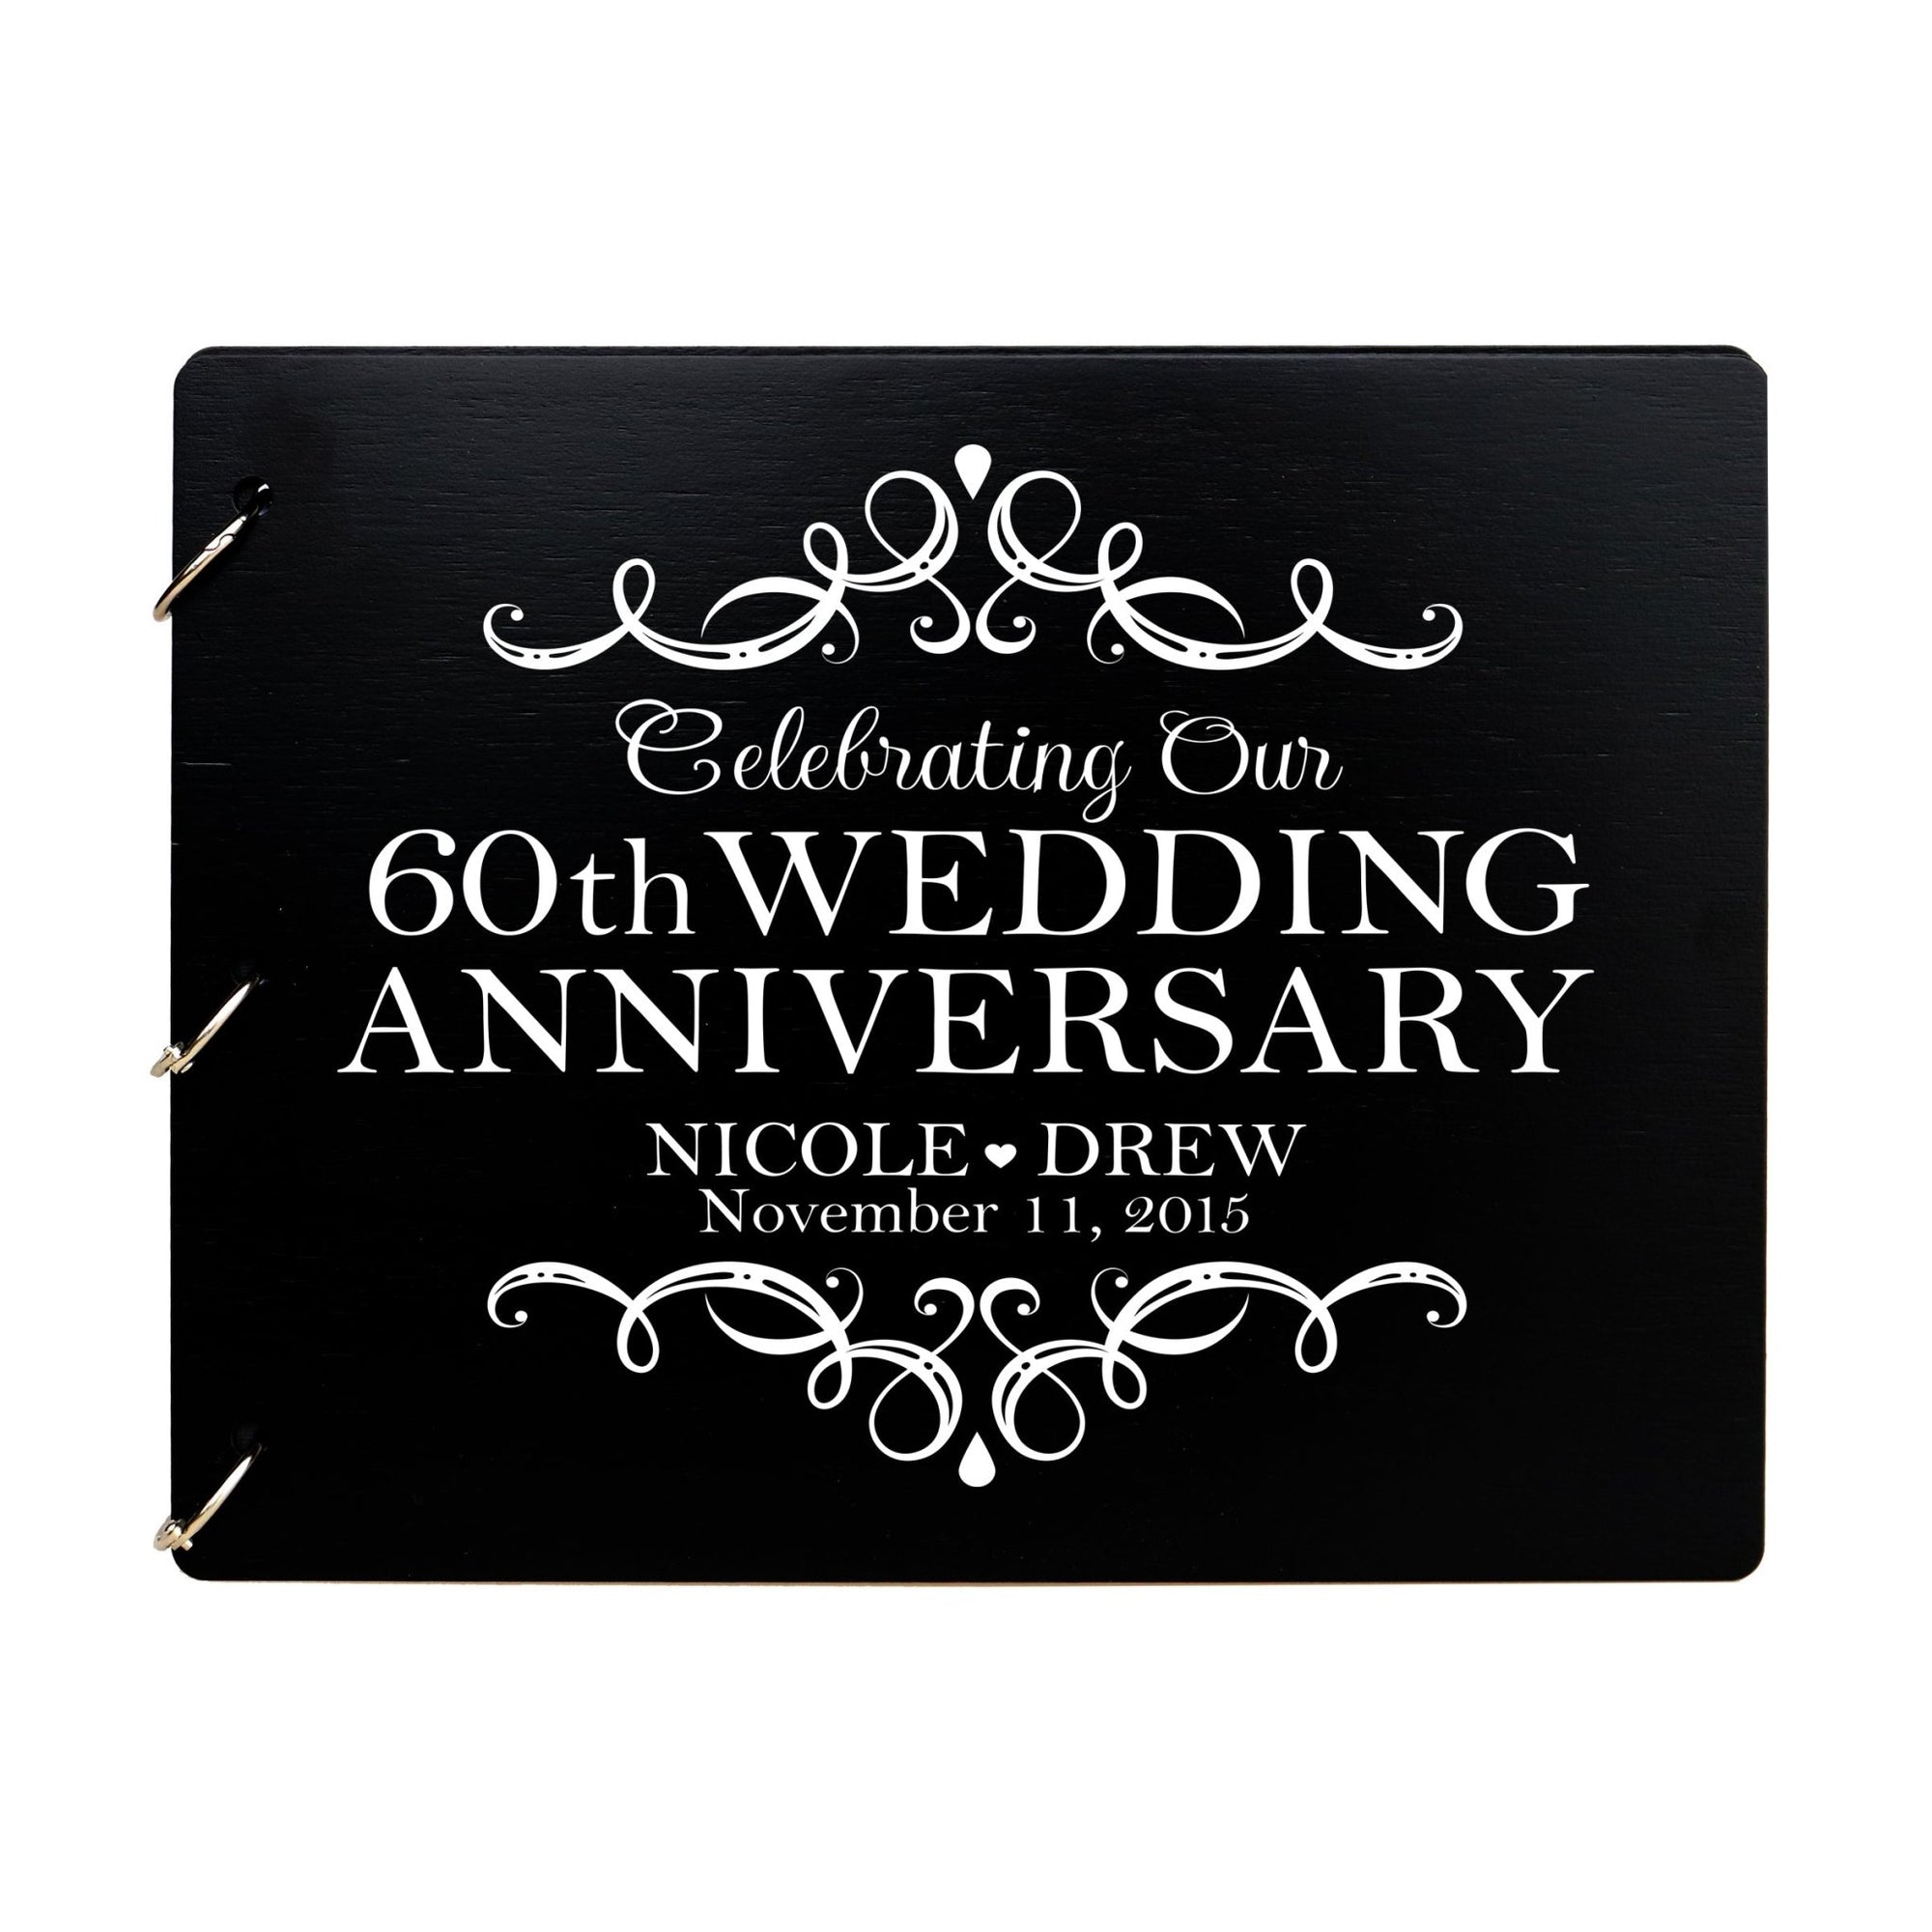 Personalized Guest Book Sign for 60th Wedding Anniversary - Celebrating - LifeSong Milestones